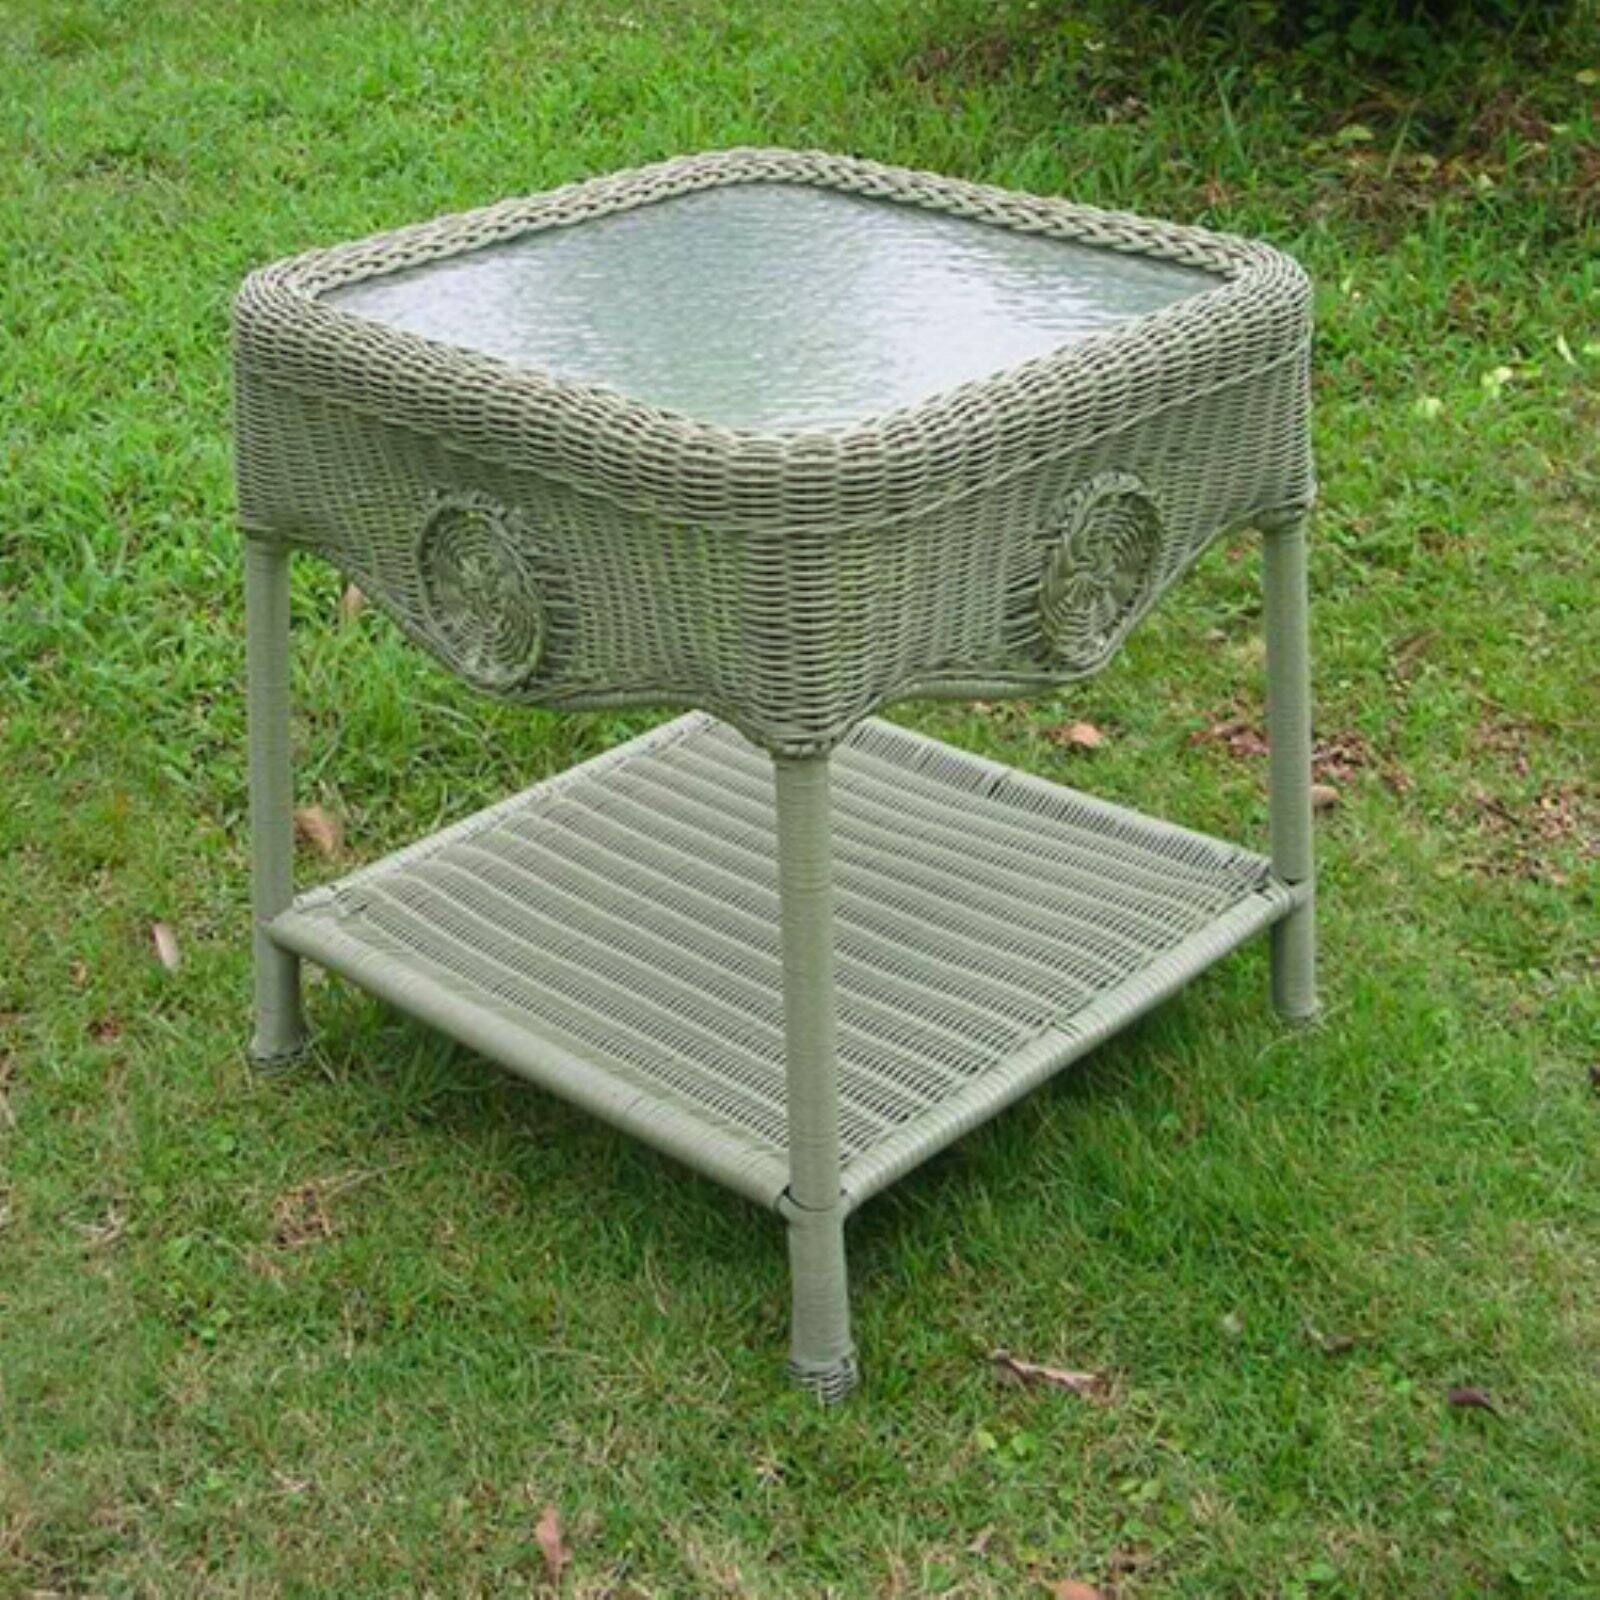 International Caravan Madison Wicker Resin Aluminum Patio Side Table with Glass - image 3 of 7